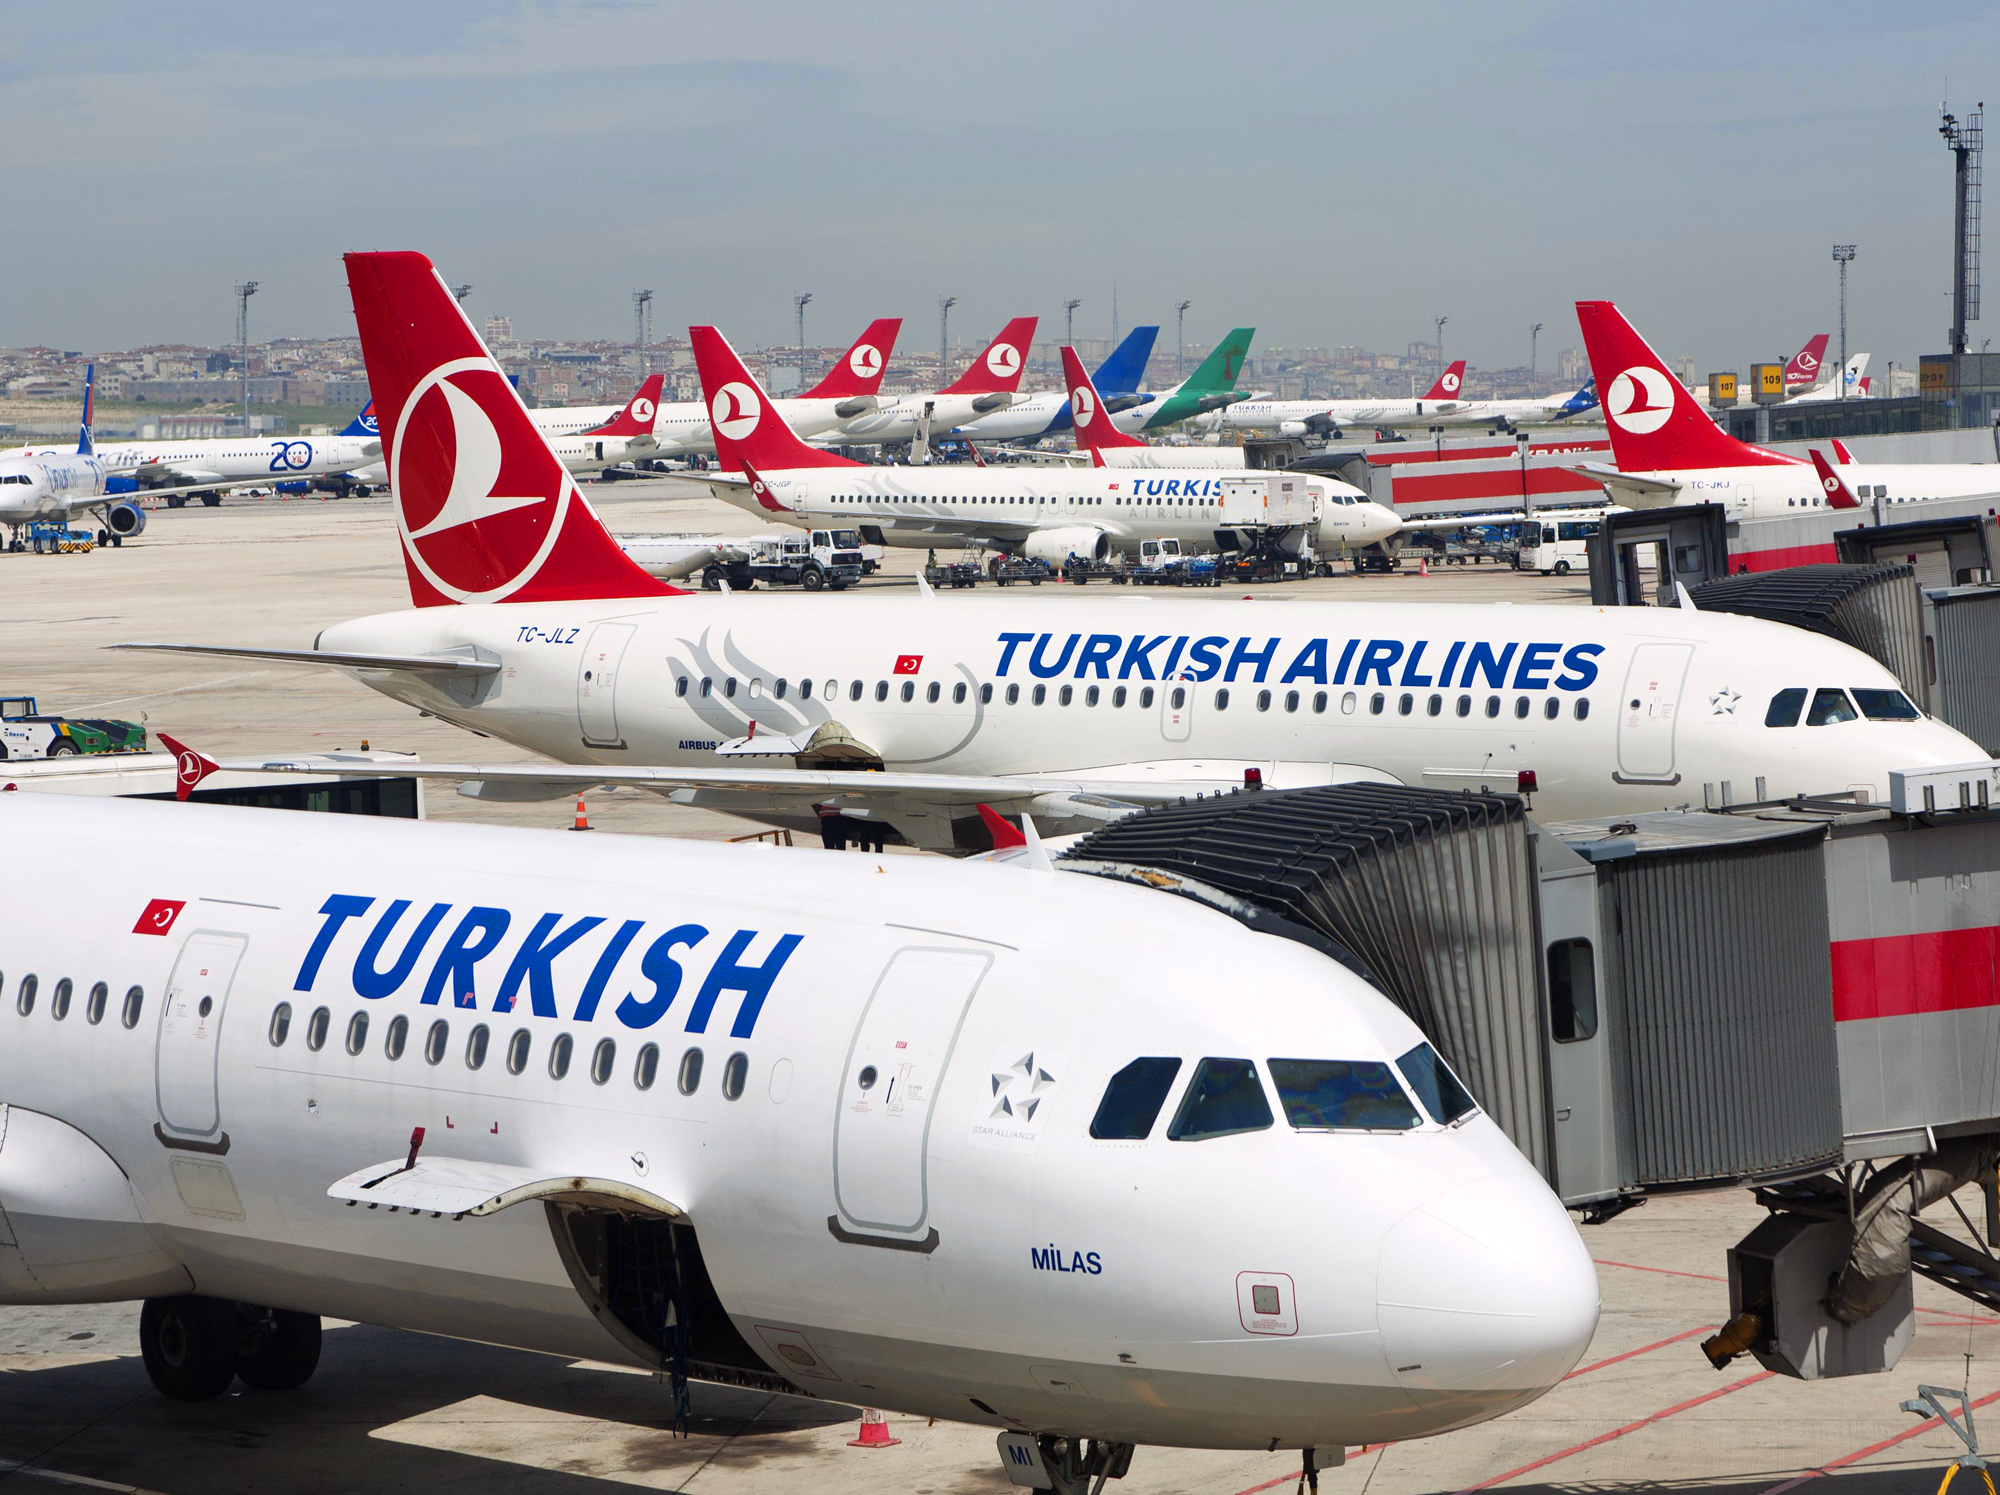 Turkish Airlines opens five business lounges in the new Istanbul airport. Part 1